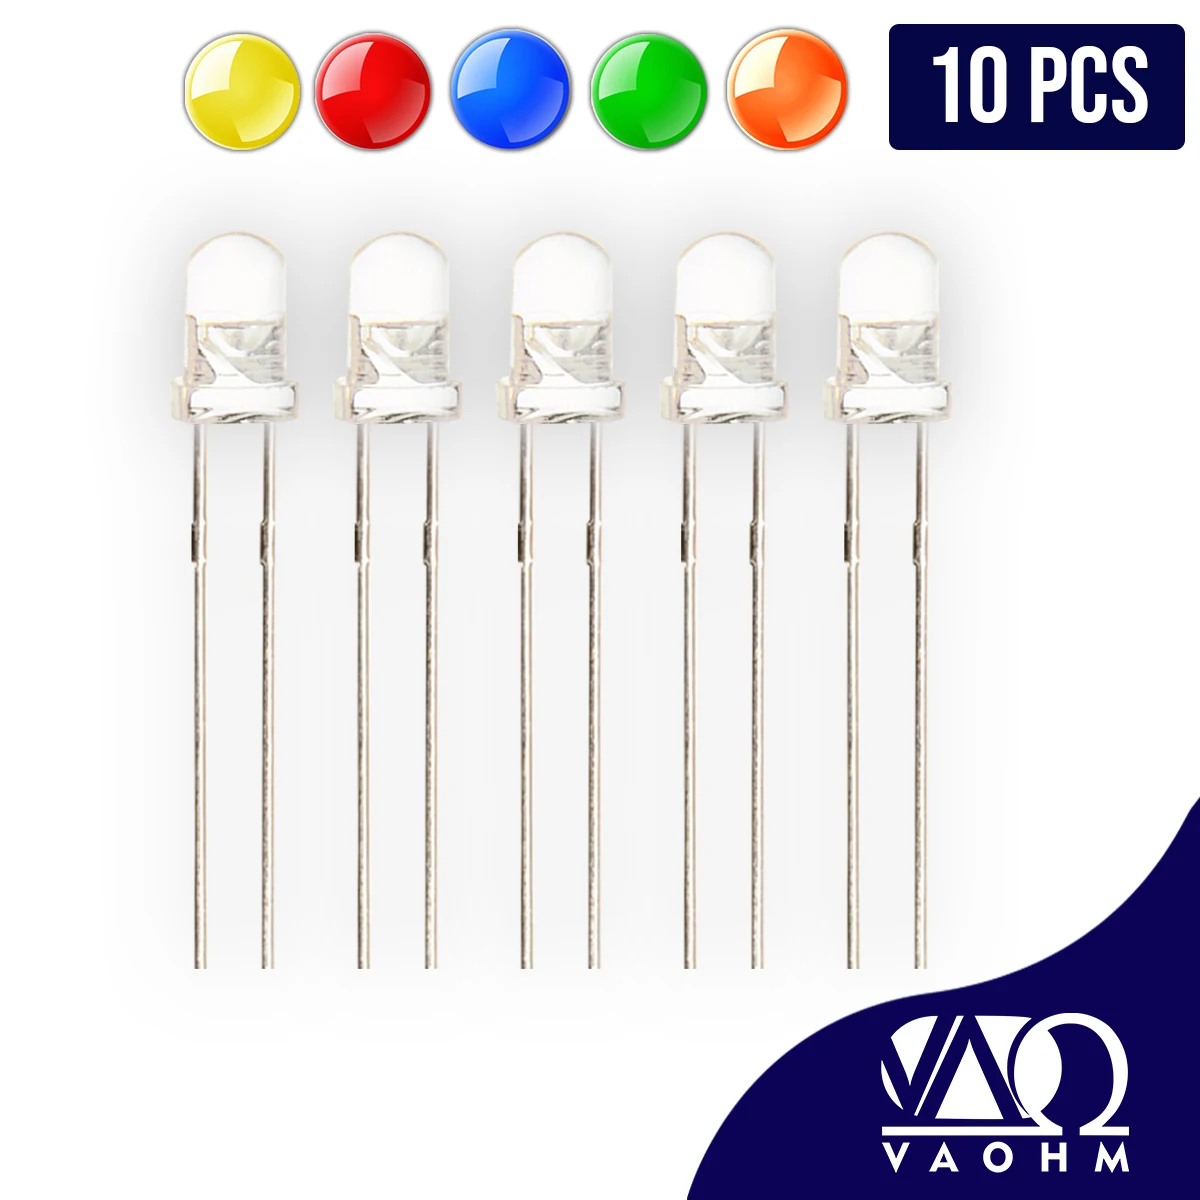 

LED 3mm Water Clear 10PCS F3 Super Bright Light Emitting Diode Green Red White Yellow Blue Orange